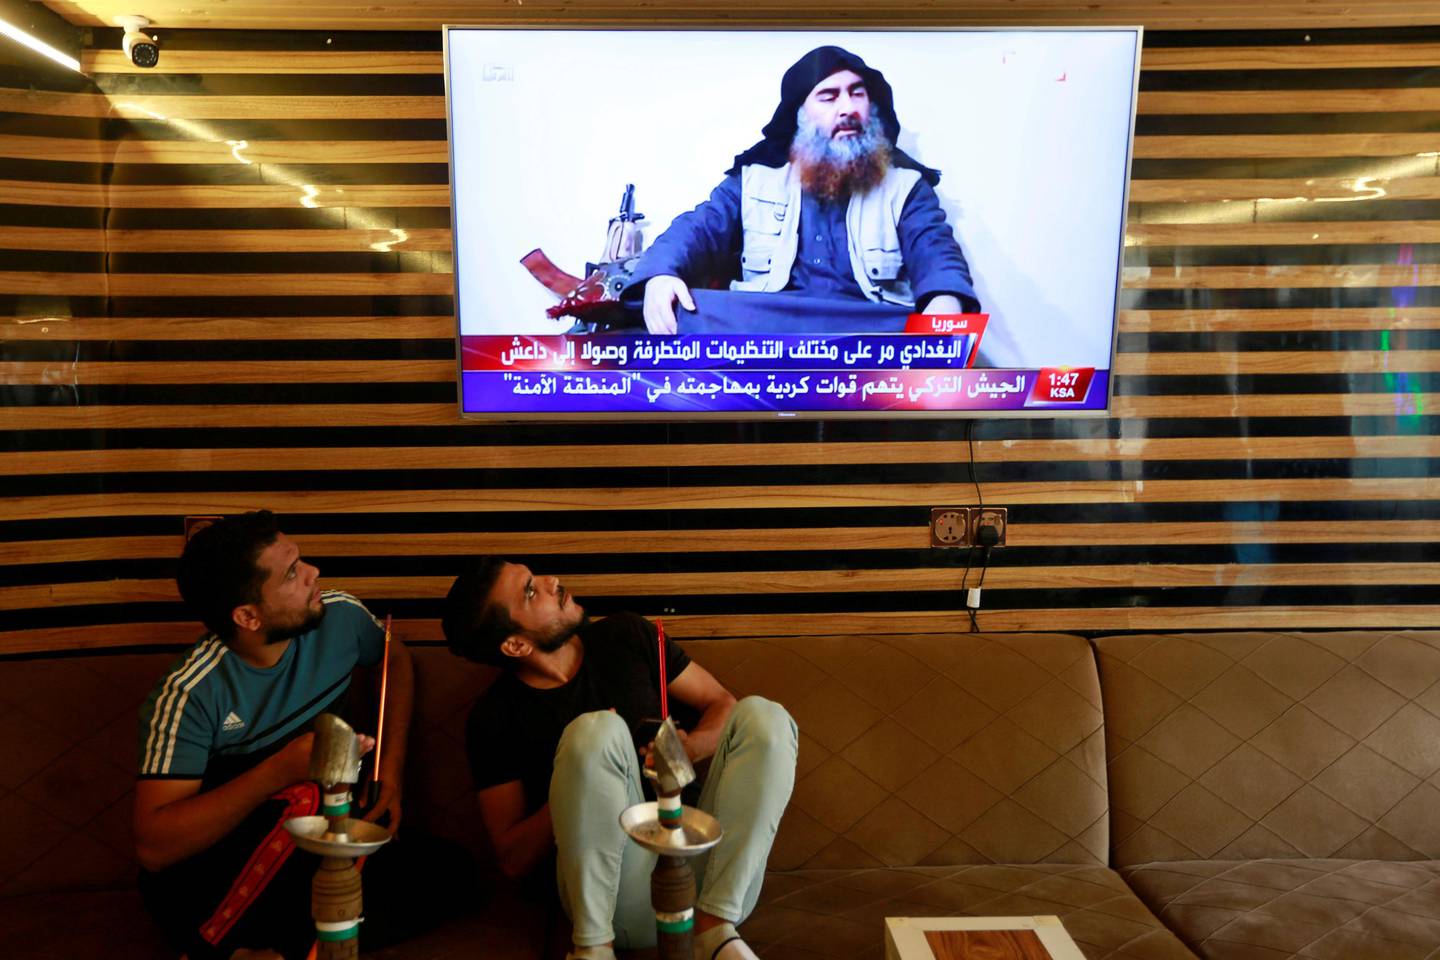 Iraqi youth watch the news of Islamic State leader Abu Bakr al-Baghdadi death, in Najaf, Iraq October 27, 2019. REUTERS/Alaa al-Marjani     TPX IMAGES OF THE DAY